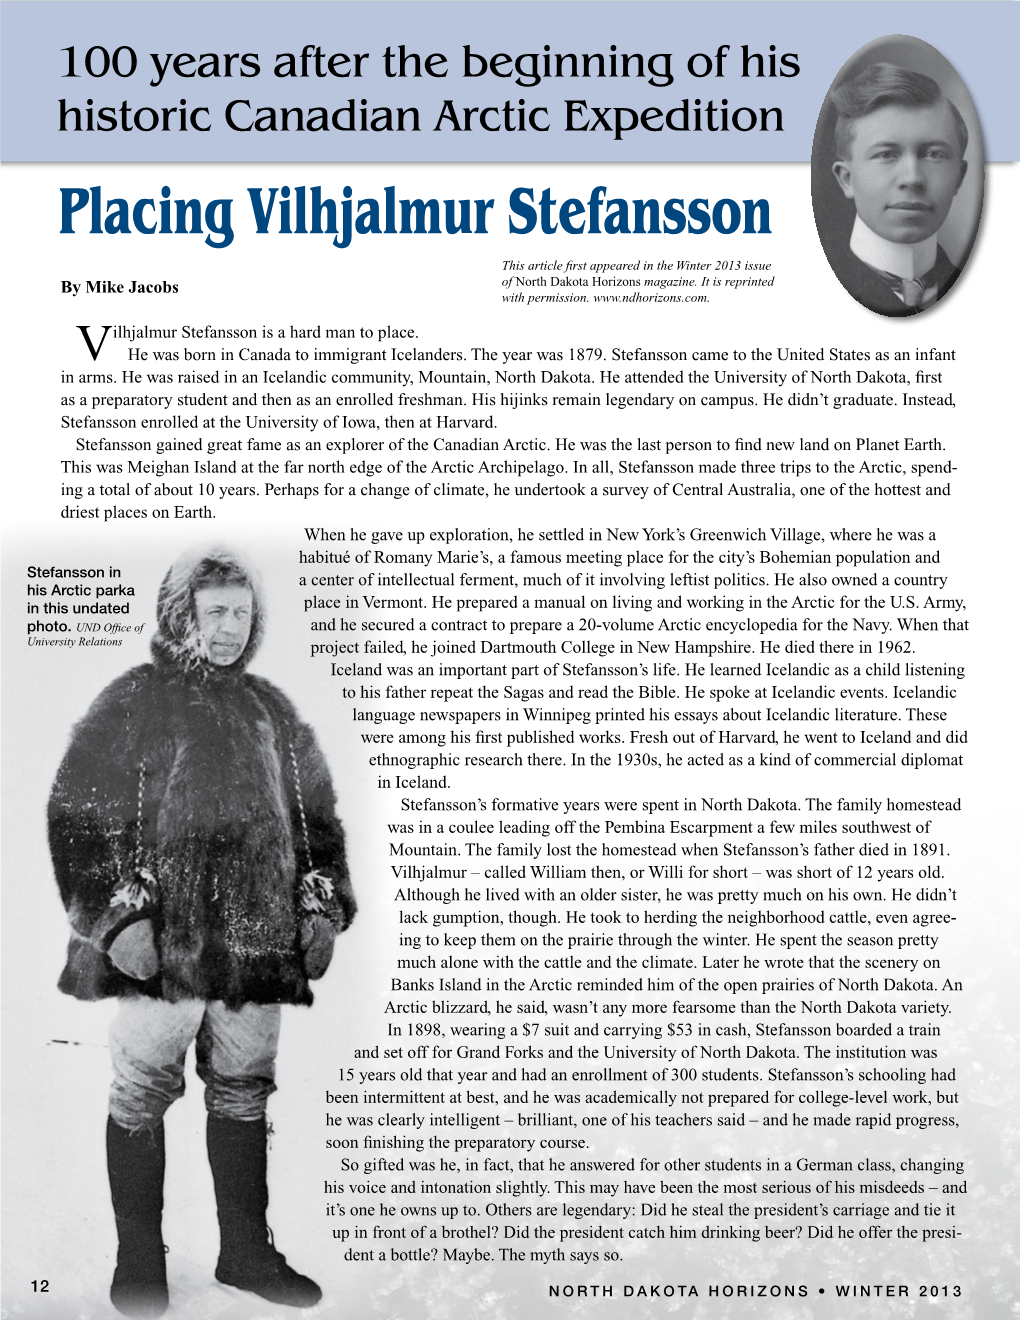 Placing Vilhjalmur Stefansson This Article First Appeared in the Winter 2013 Issue by Mike Jacobs of North Dakota Horizons Magazine